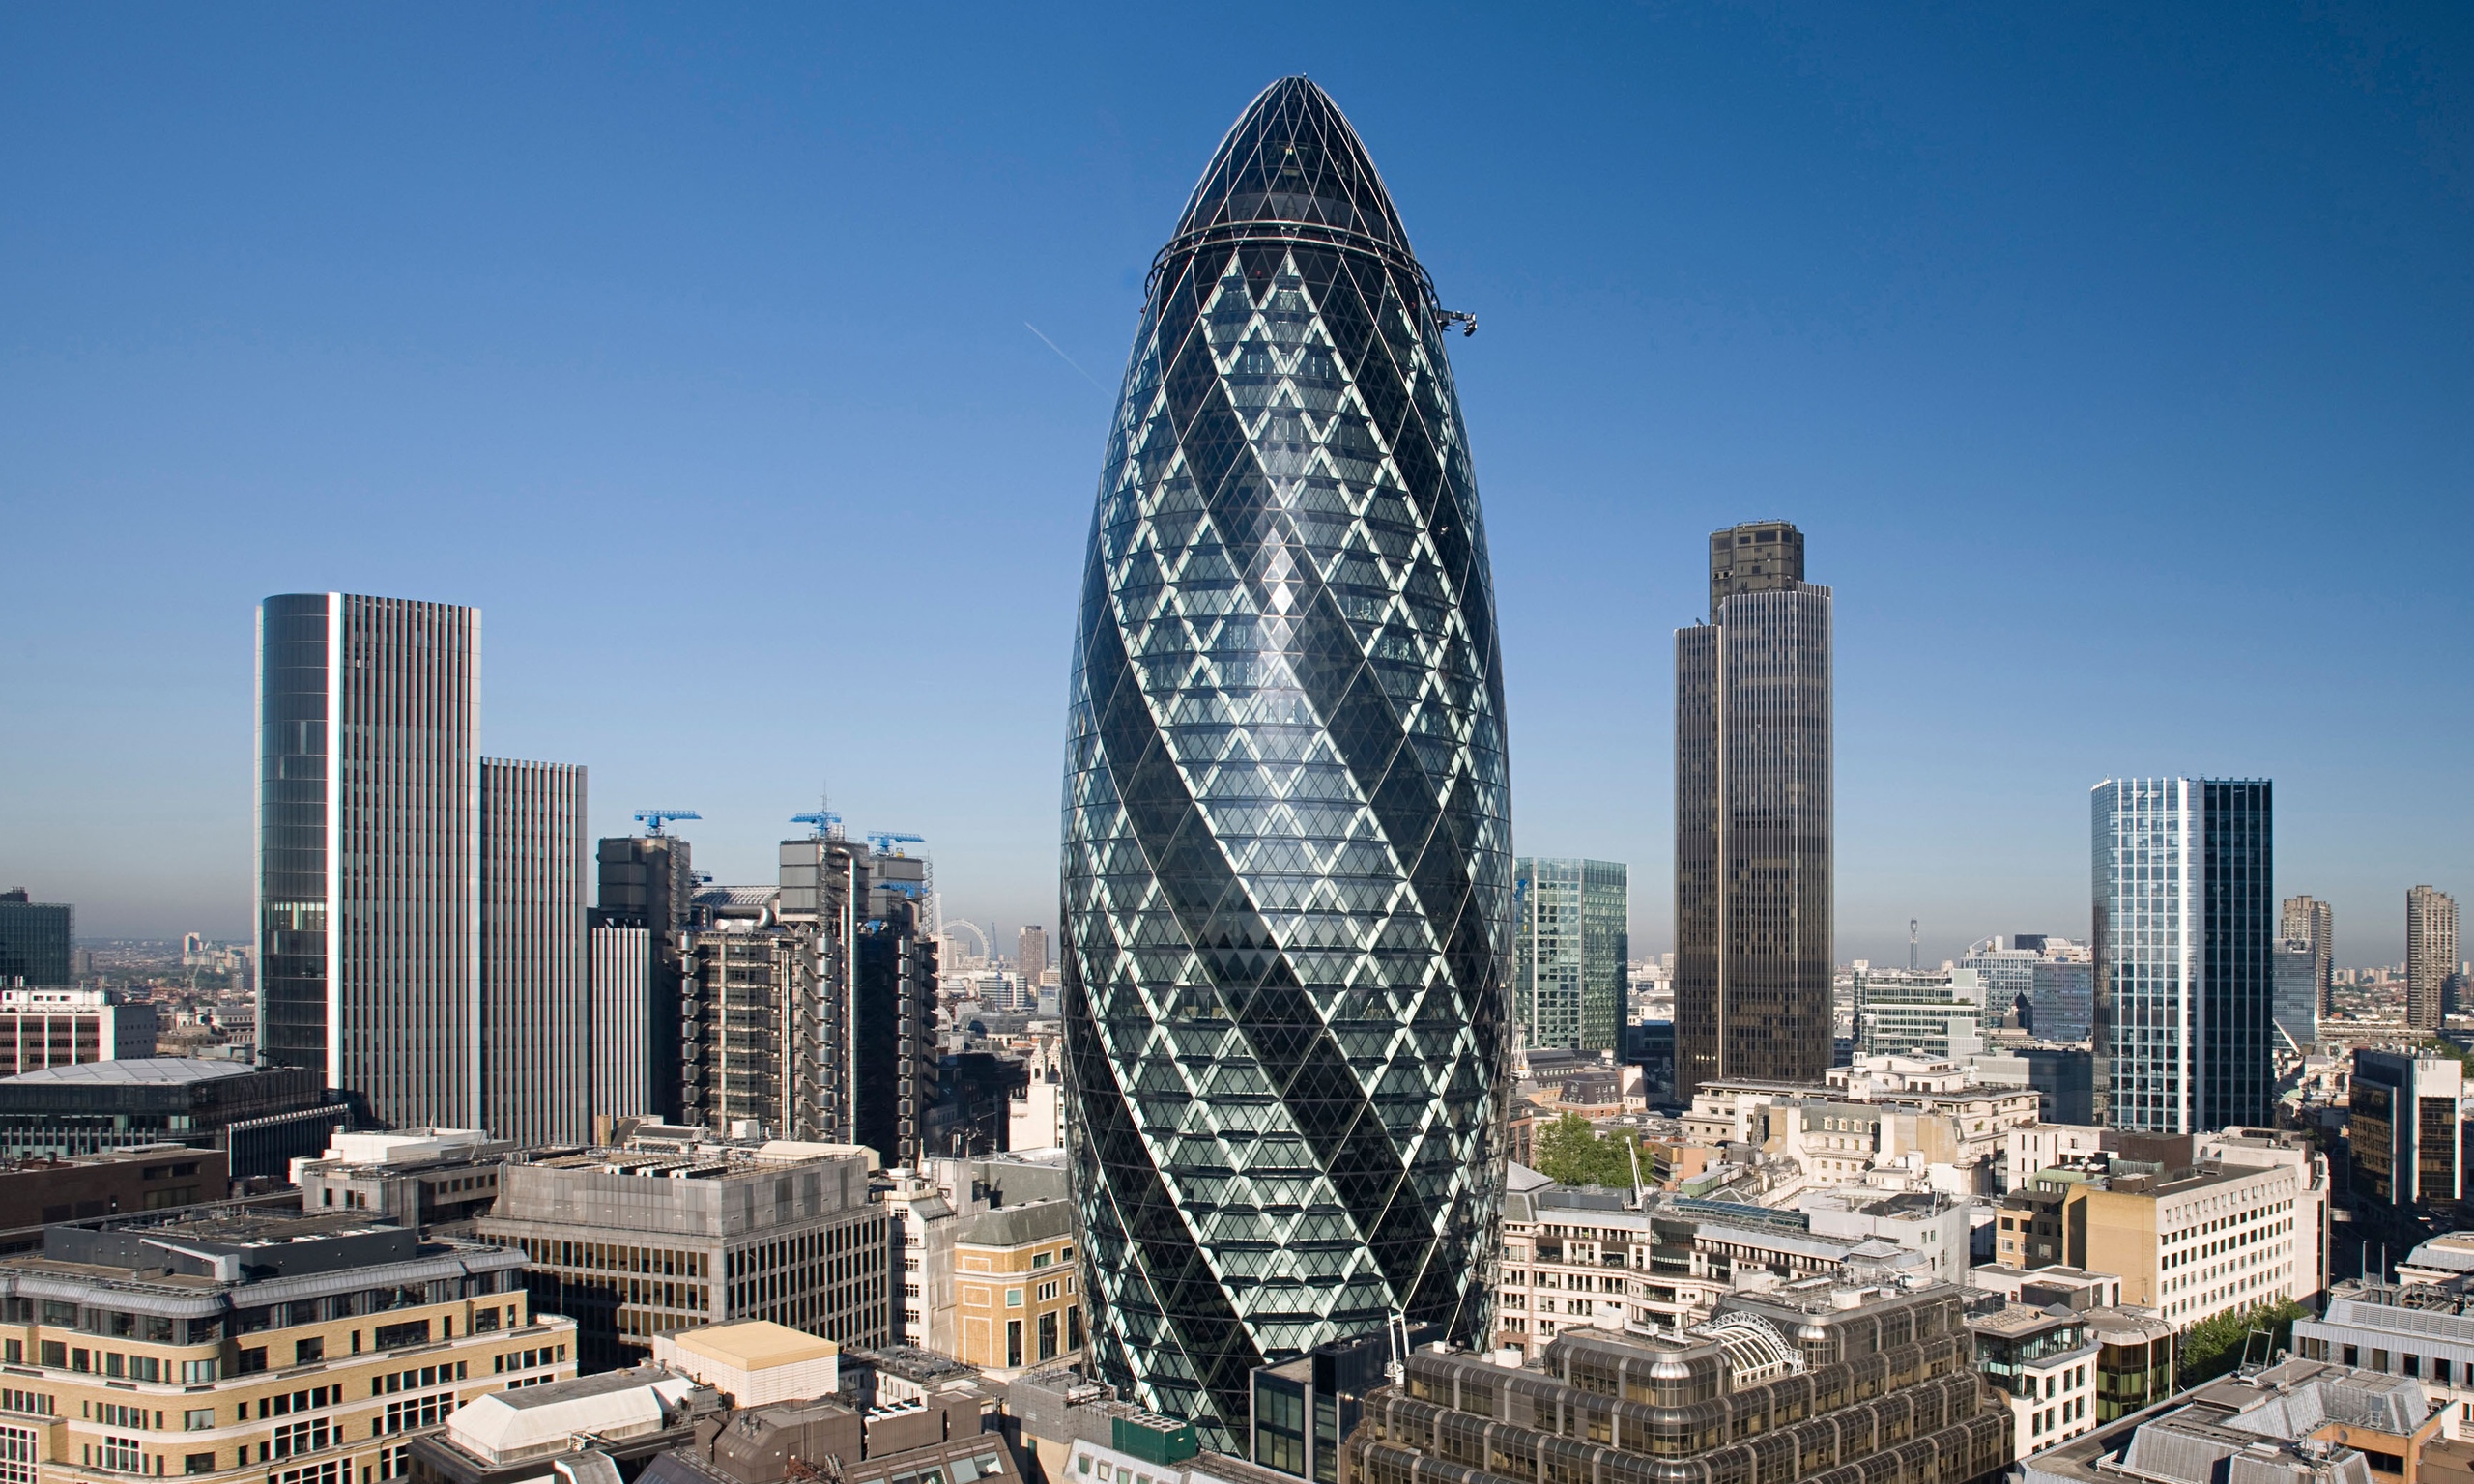 The Gerkin building in London was built by reinsurer Swiss Re. (Photo internet reproduction)